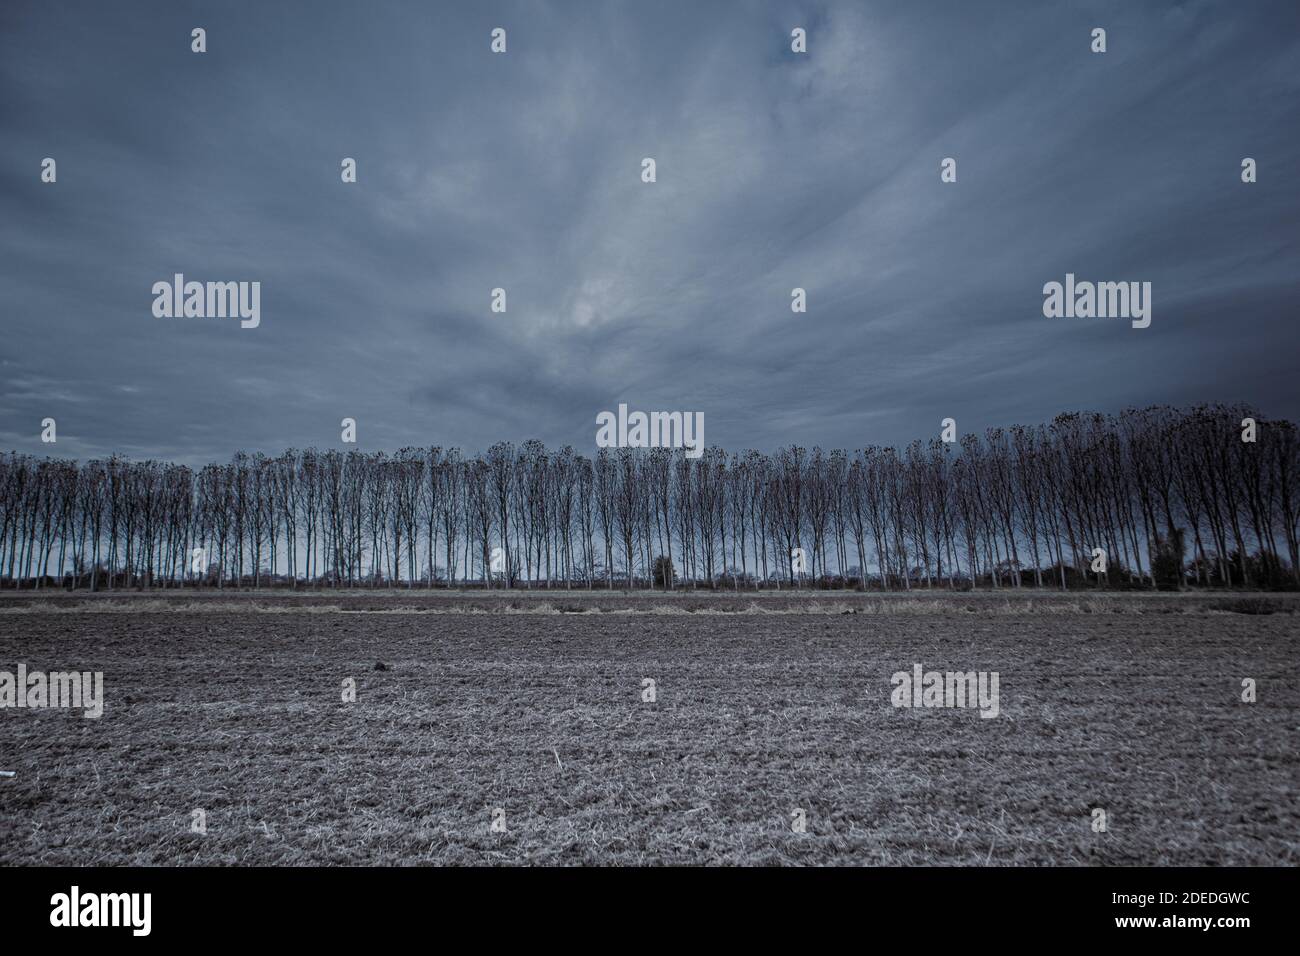 An open field with a row of trees with a grey cloudy sky Stock Photo